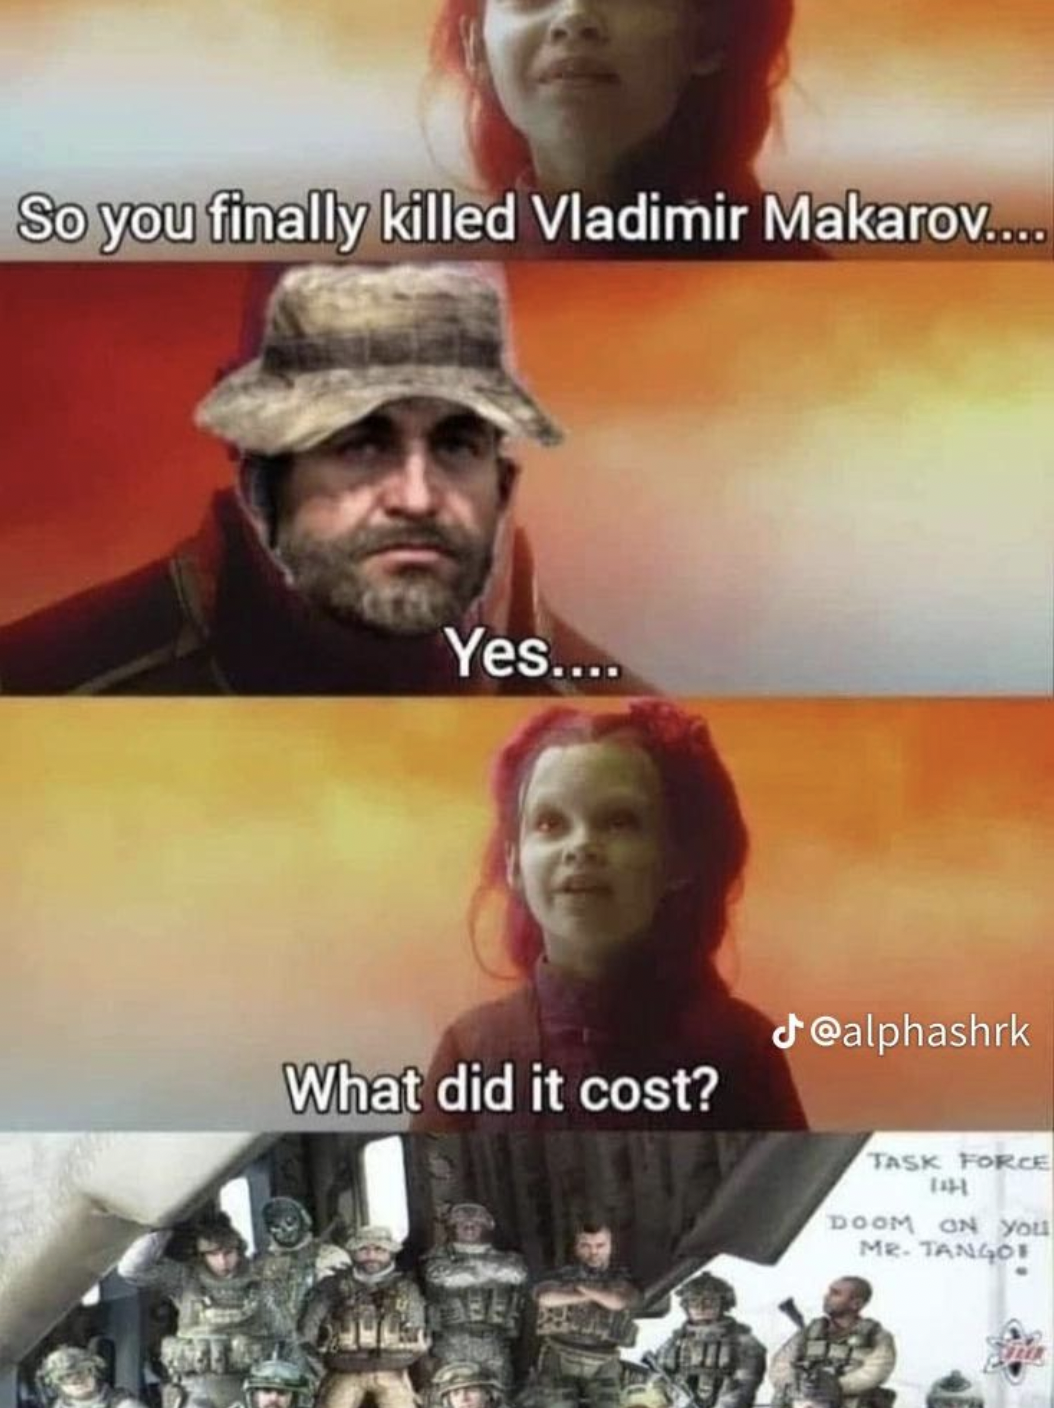 Call of Duty Memes - poster - So you finally killed Vladimir Makarov.... Yes.... What did it cost? Task Force Dhe Doom On You Me Tango